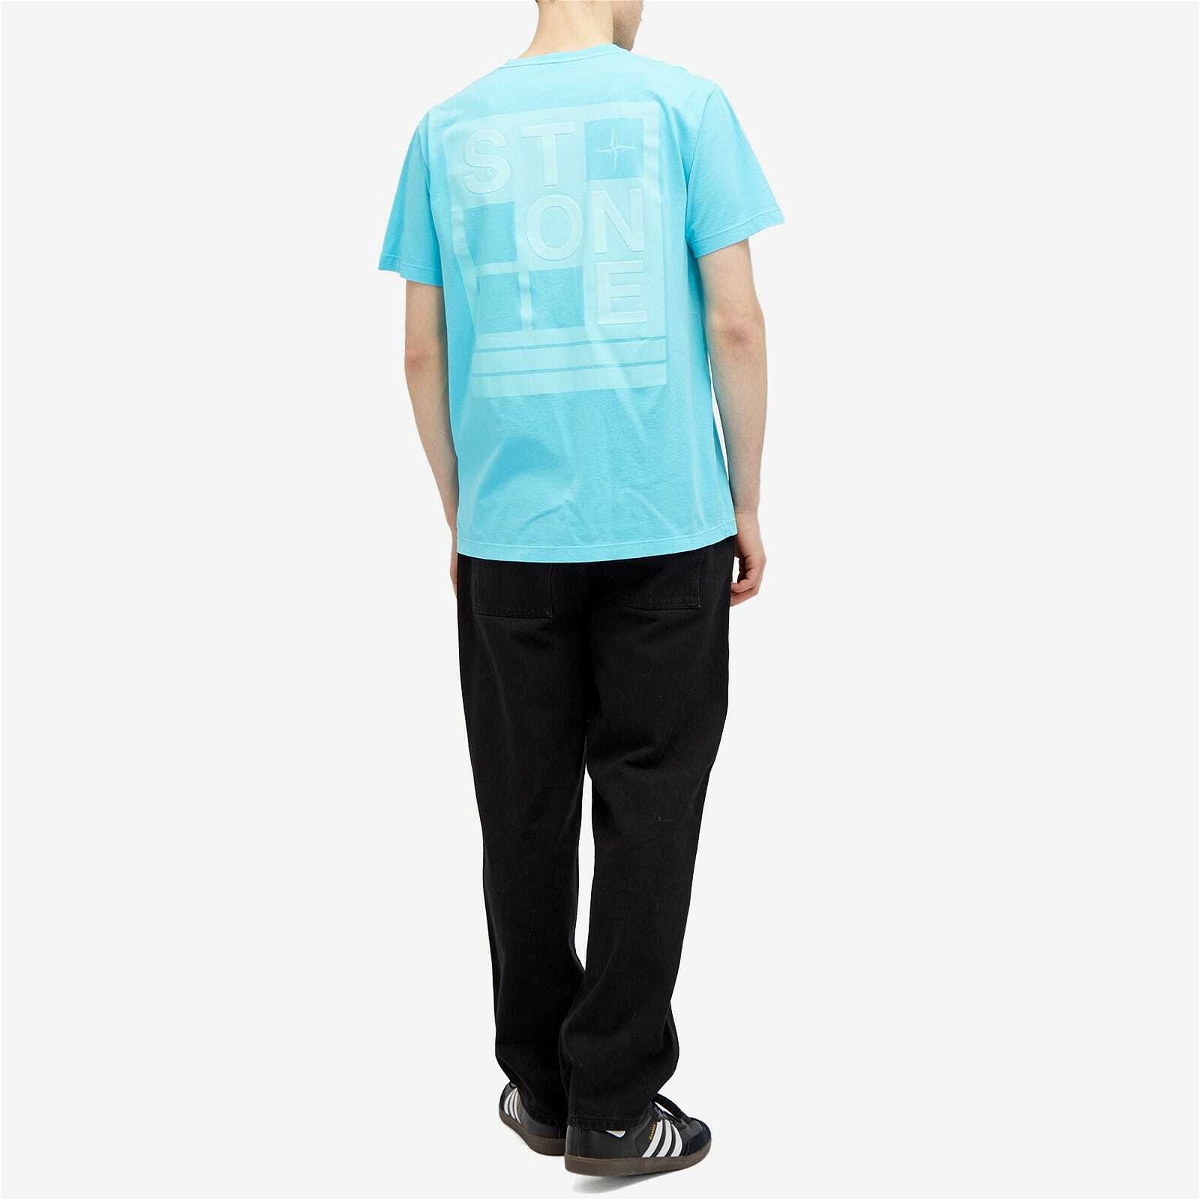 Stone Island Men's Abbreviation Three Graphic T-Shirt in Turquoise